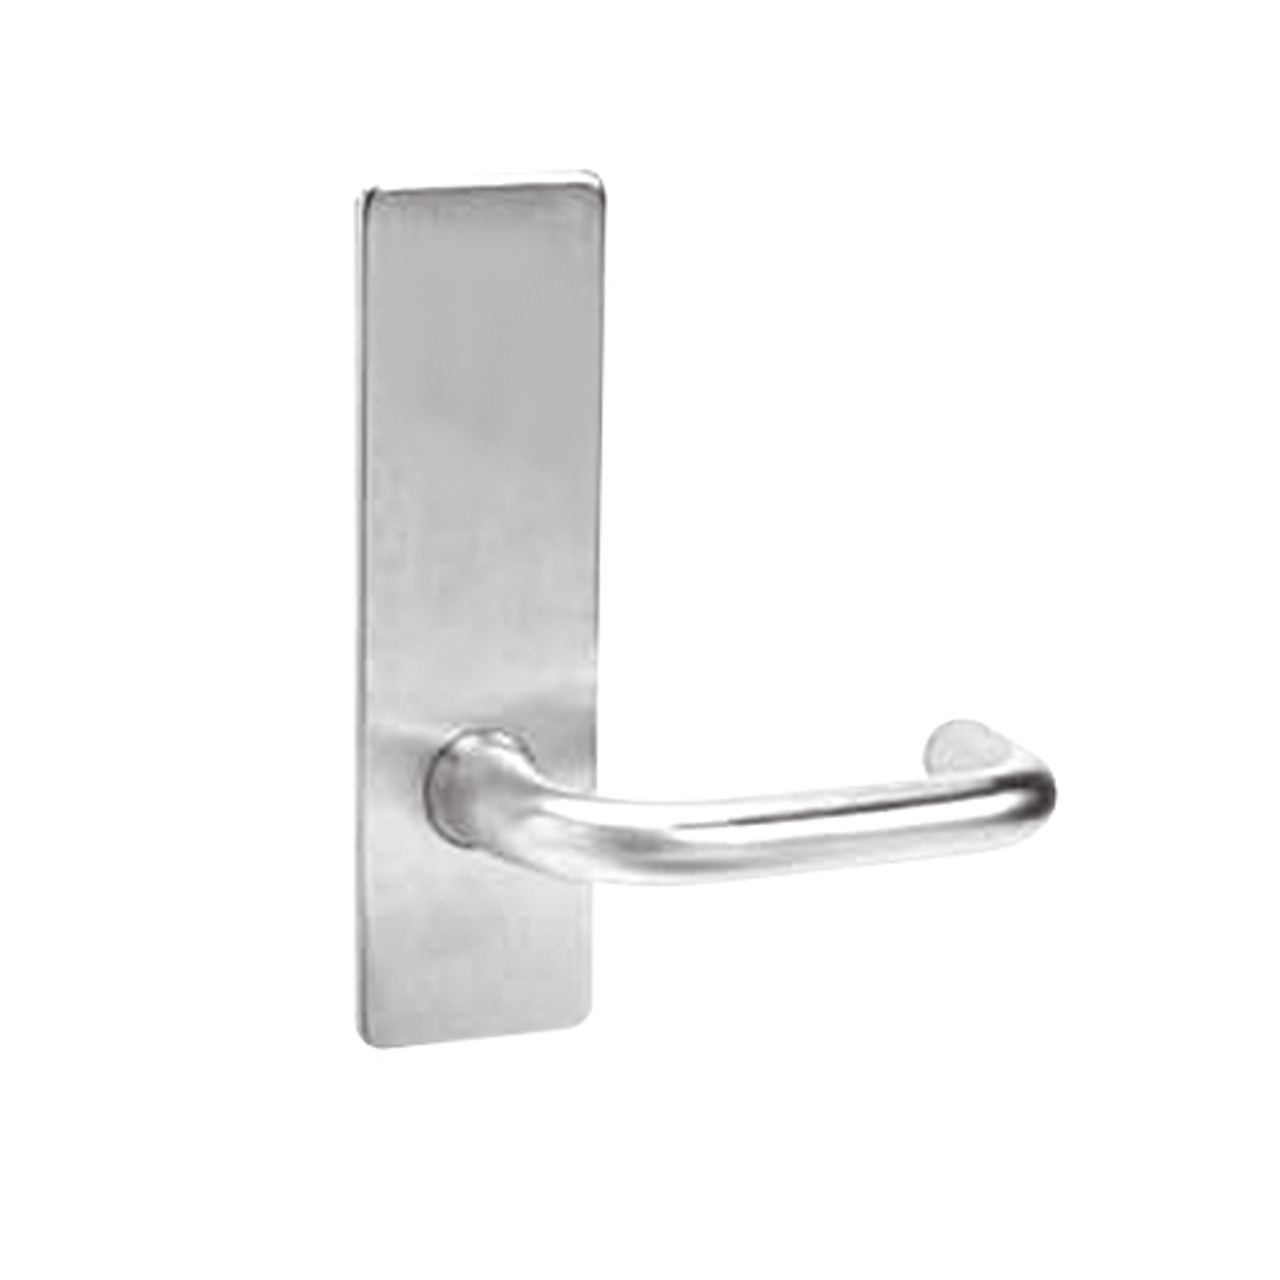 ML2060-LSR-629 Corbin Russwin ML2000 Series Mortise Privacy Locksets with Lustra Lever in Bright Stainless Steel